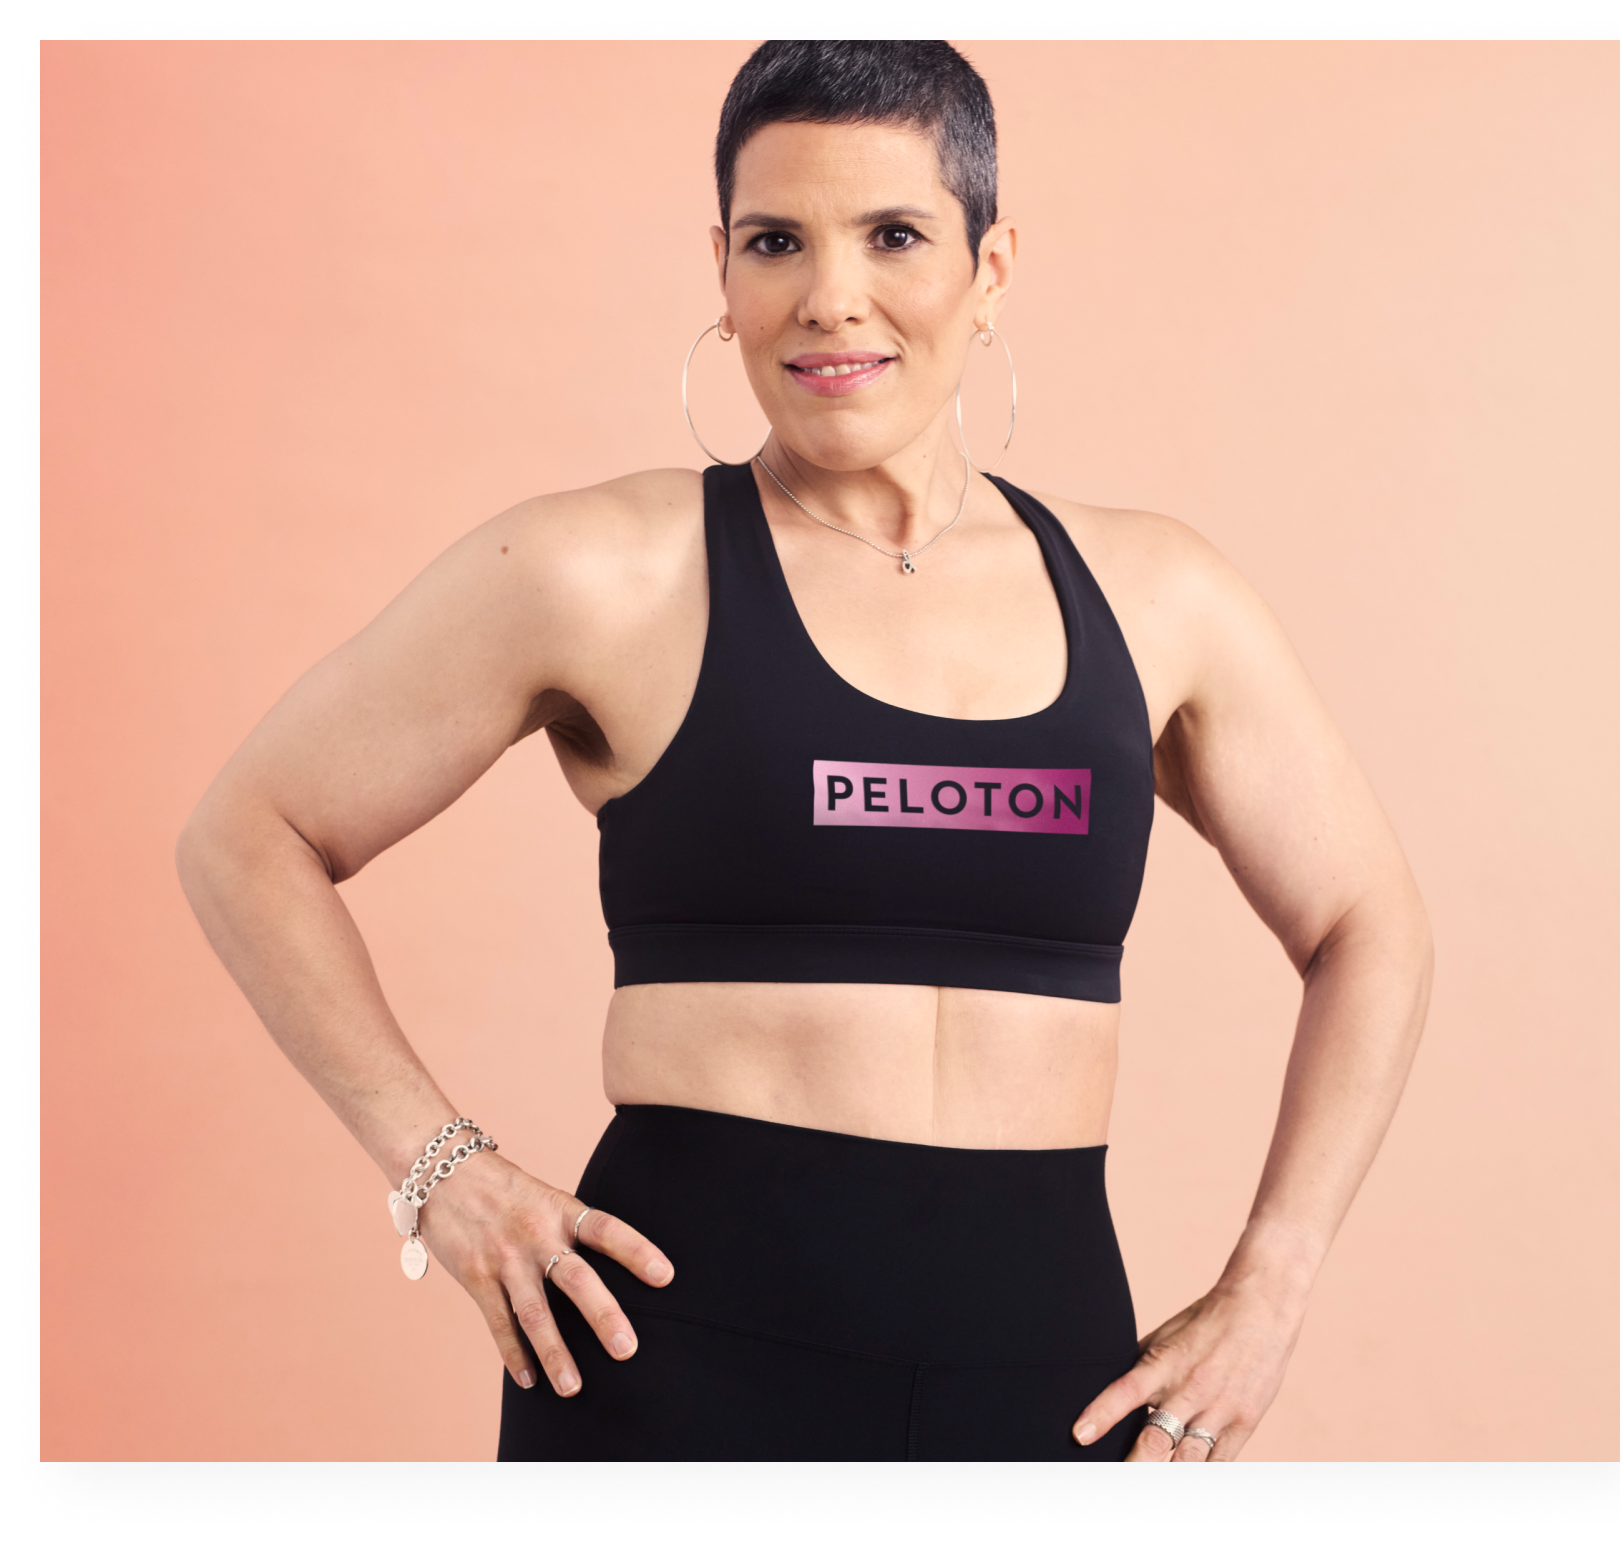 New Peloton Breast Cancer Awareness Apparel Collection by Leanne